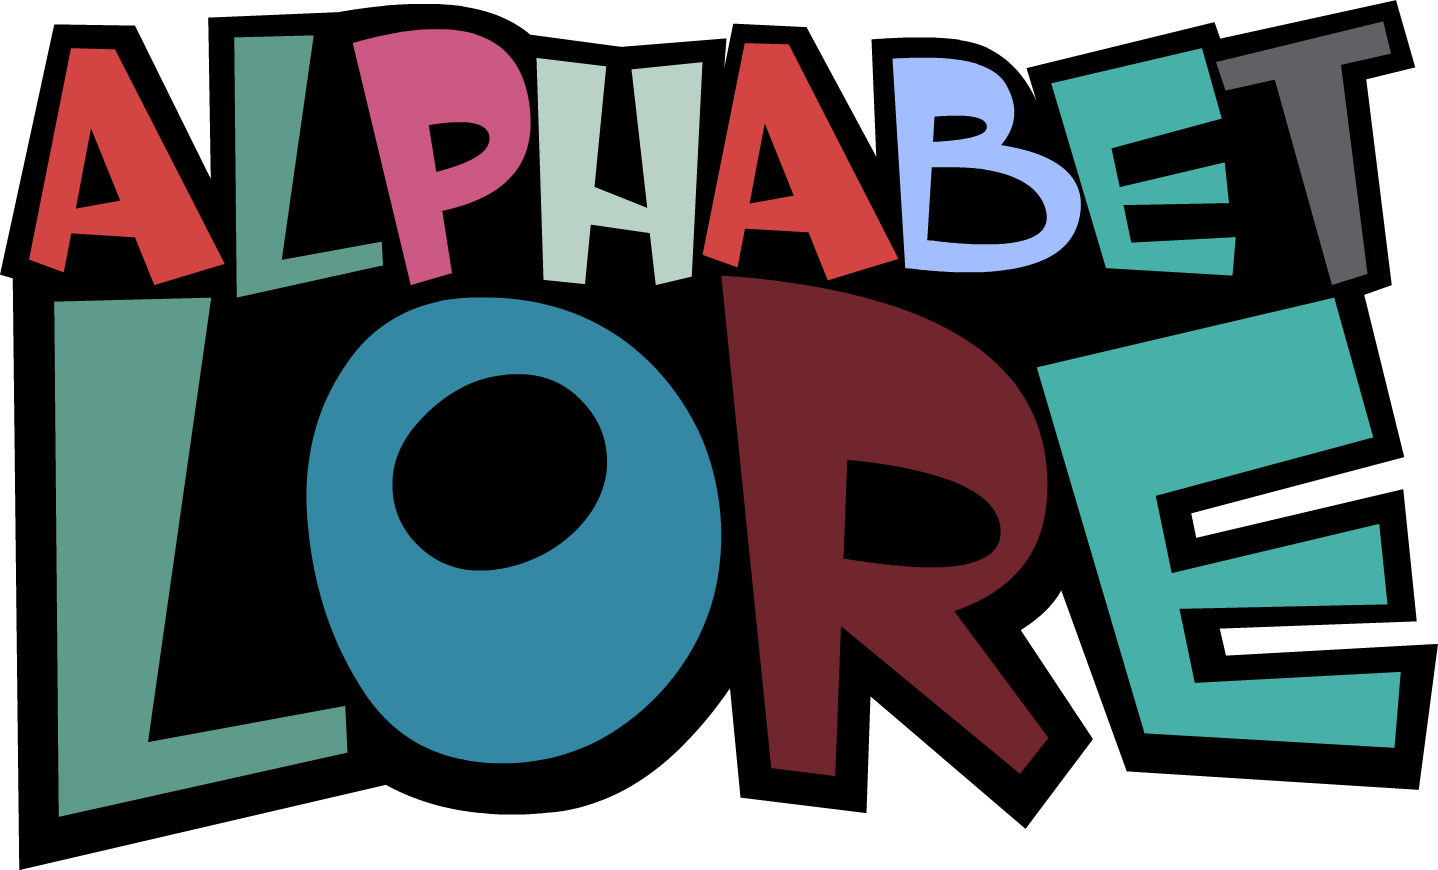 The unofficial alphabet lore community in a nutshell